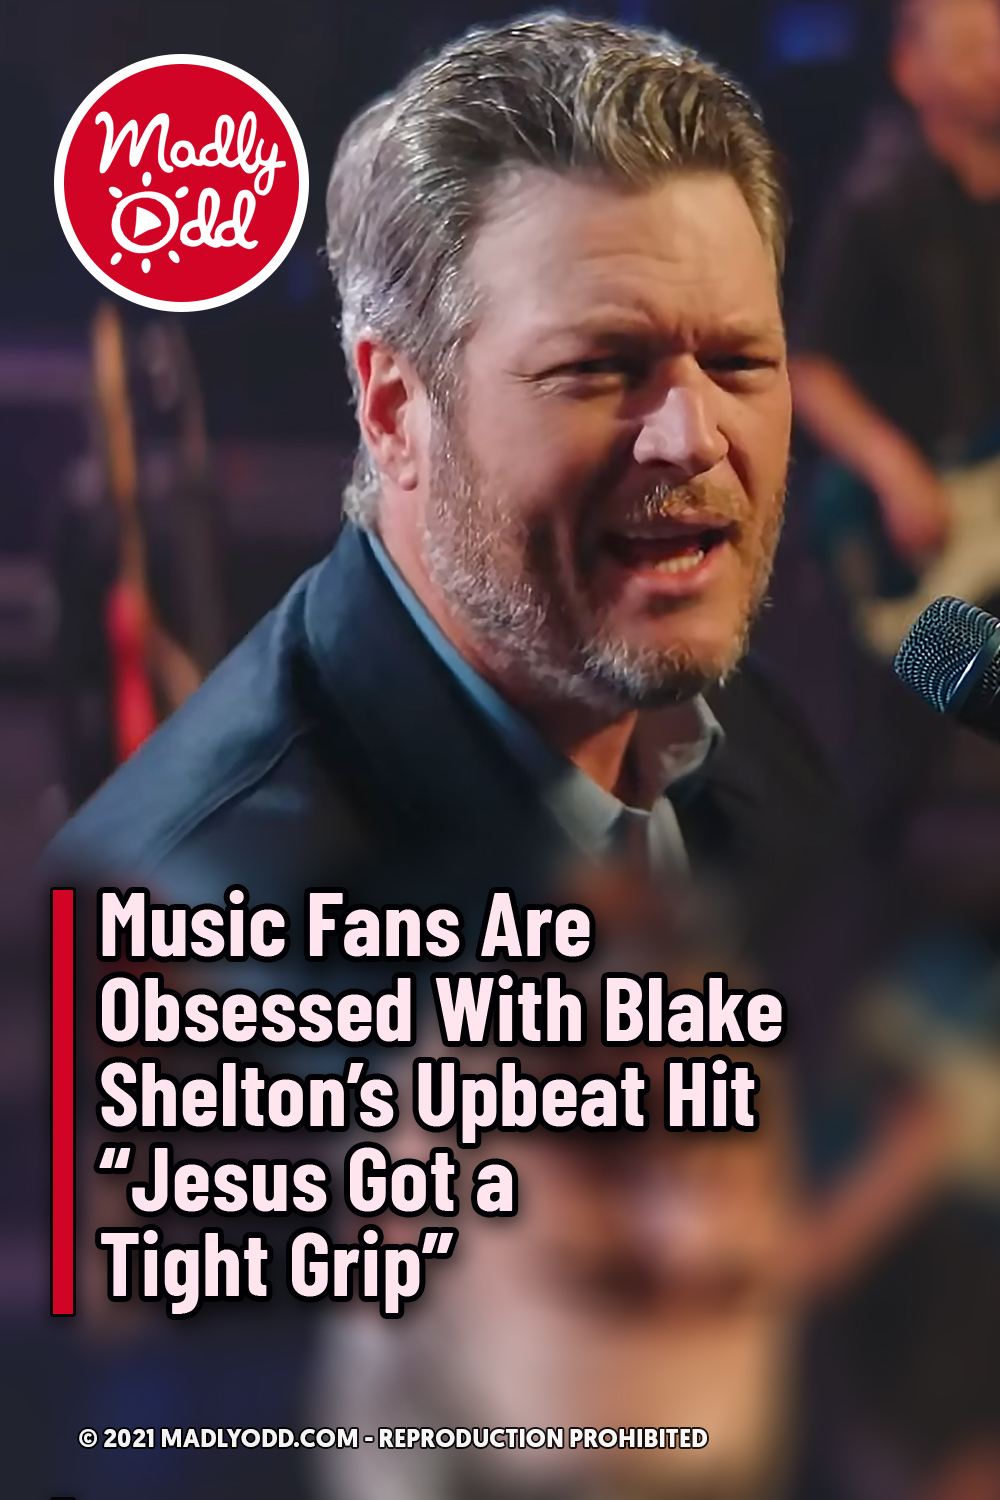 Music Fans Are Obsessed With Blake Shelton’s Upbeat Hit “Jesus Got a Tight Grip”